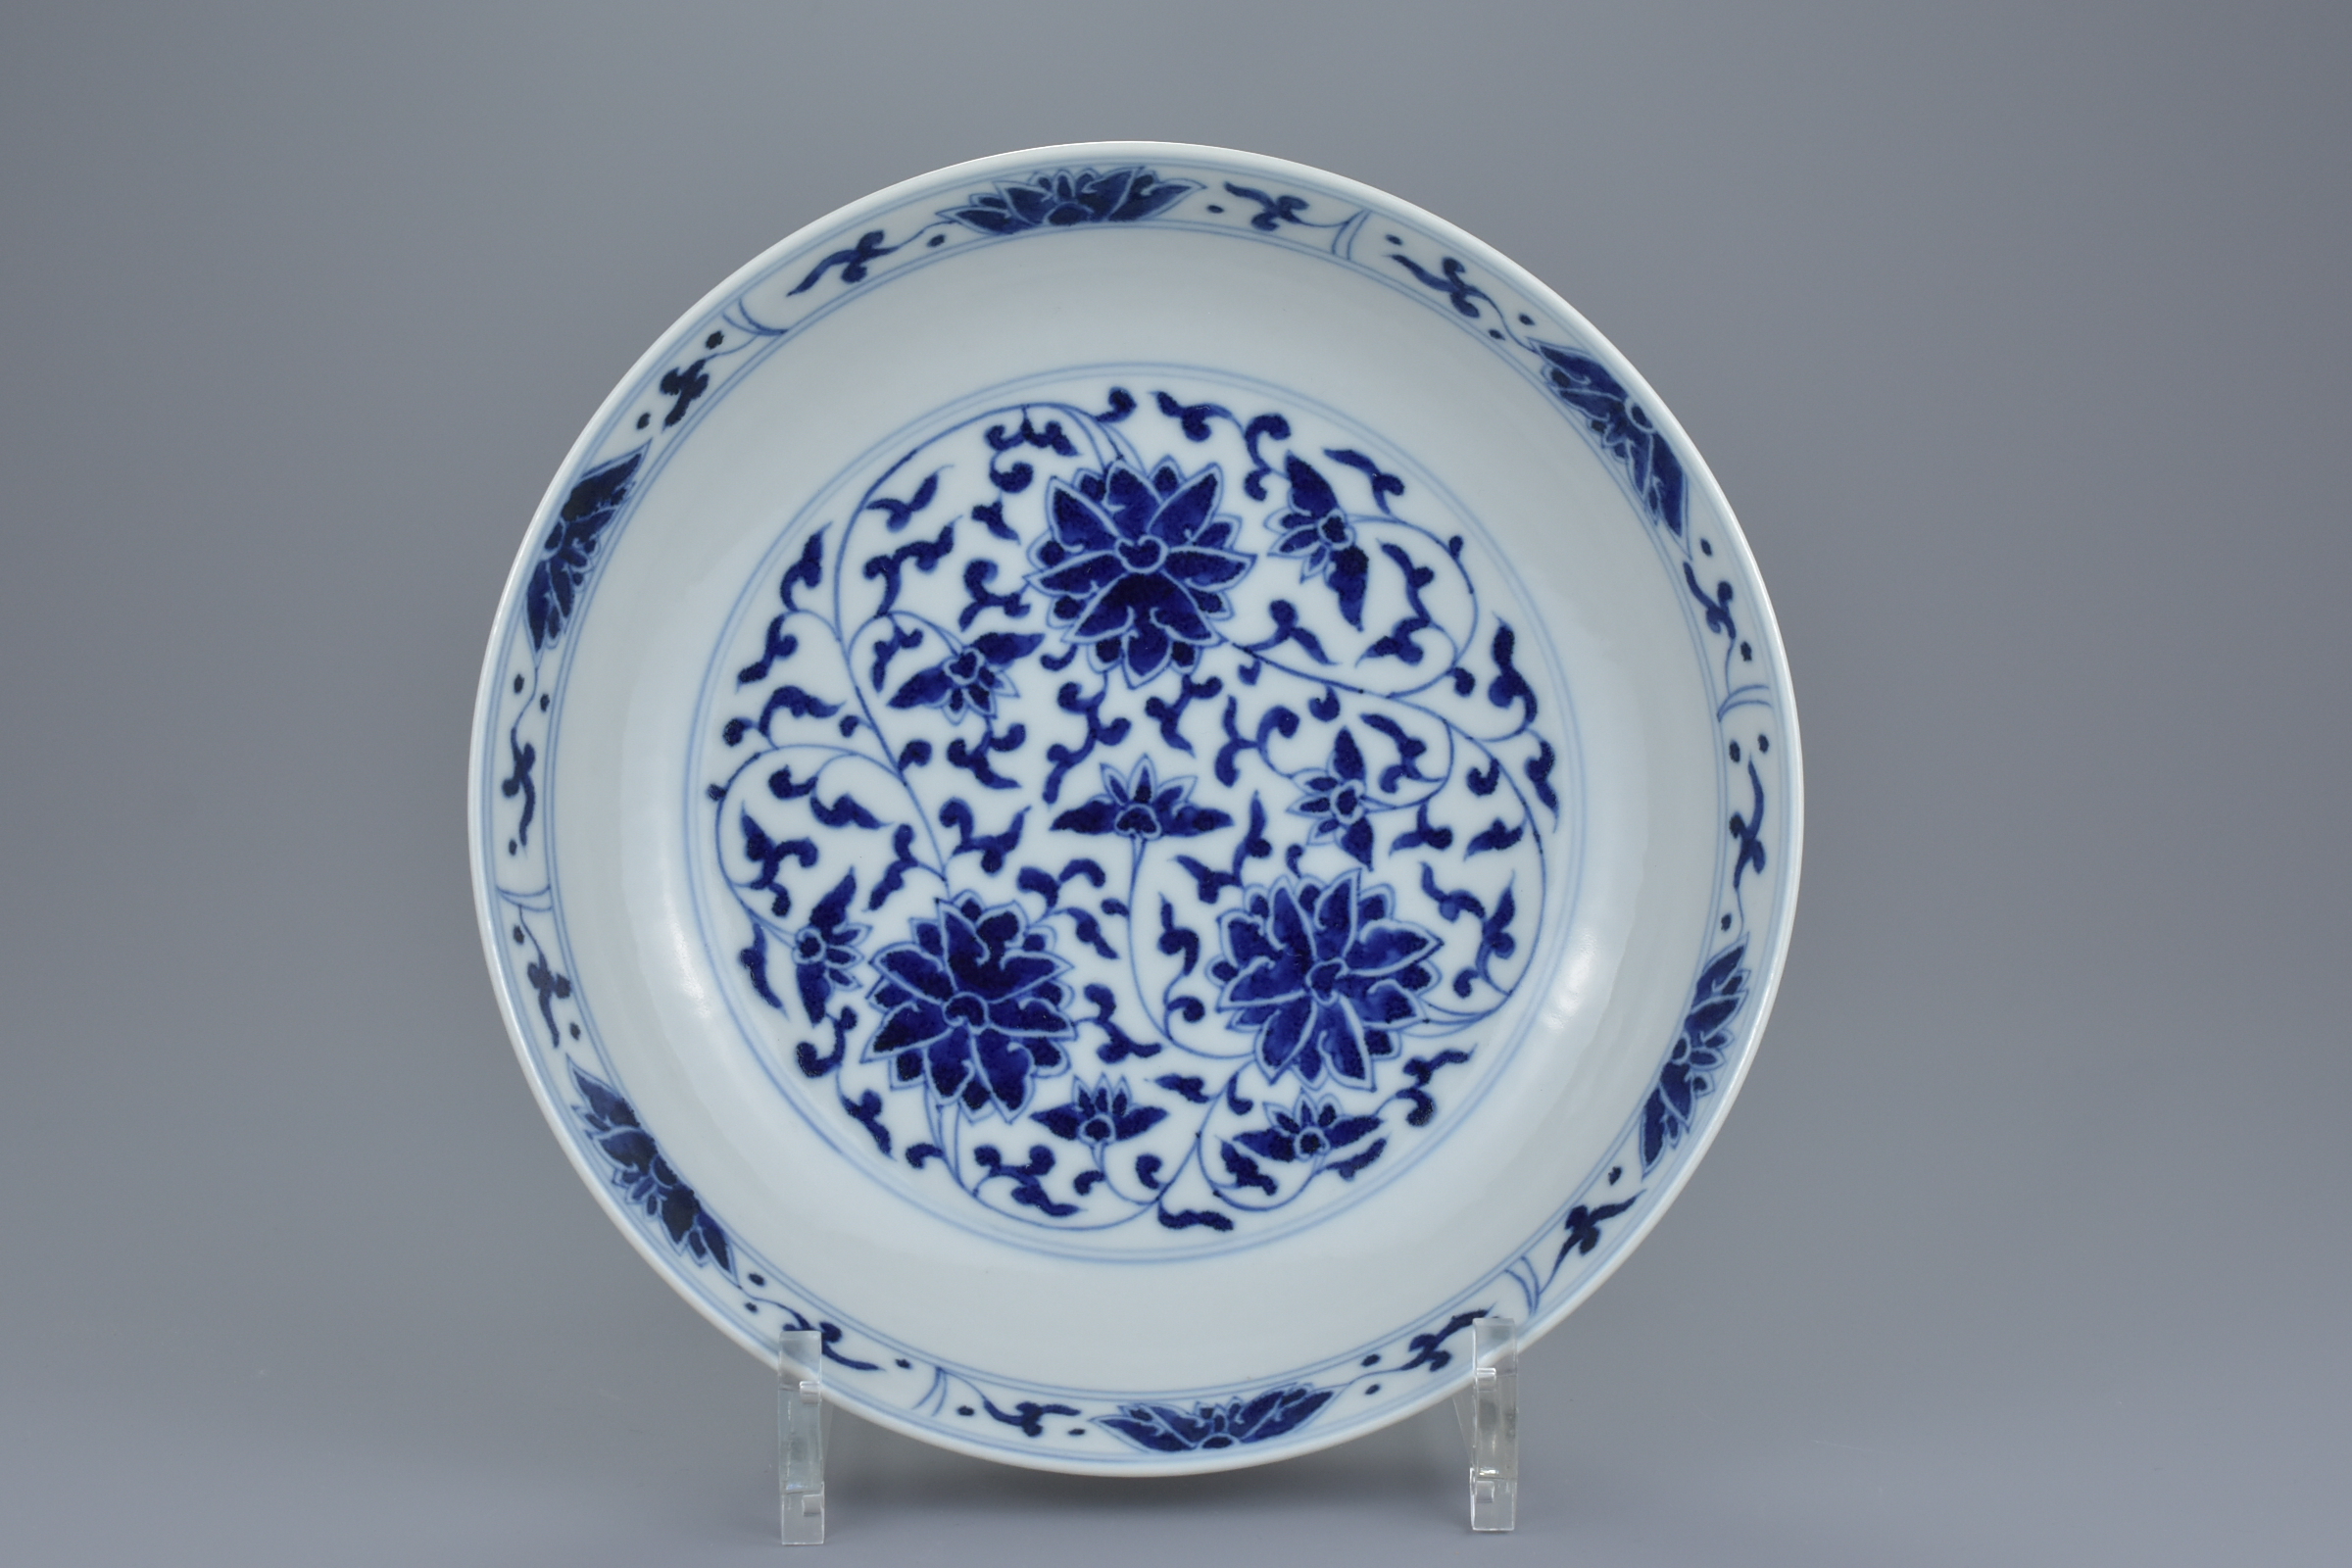 A Chinese late 19th century blue and white porcelain dish with floral lotus, chrysanthemum and peony